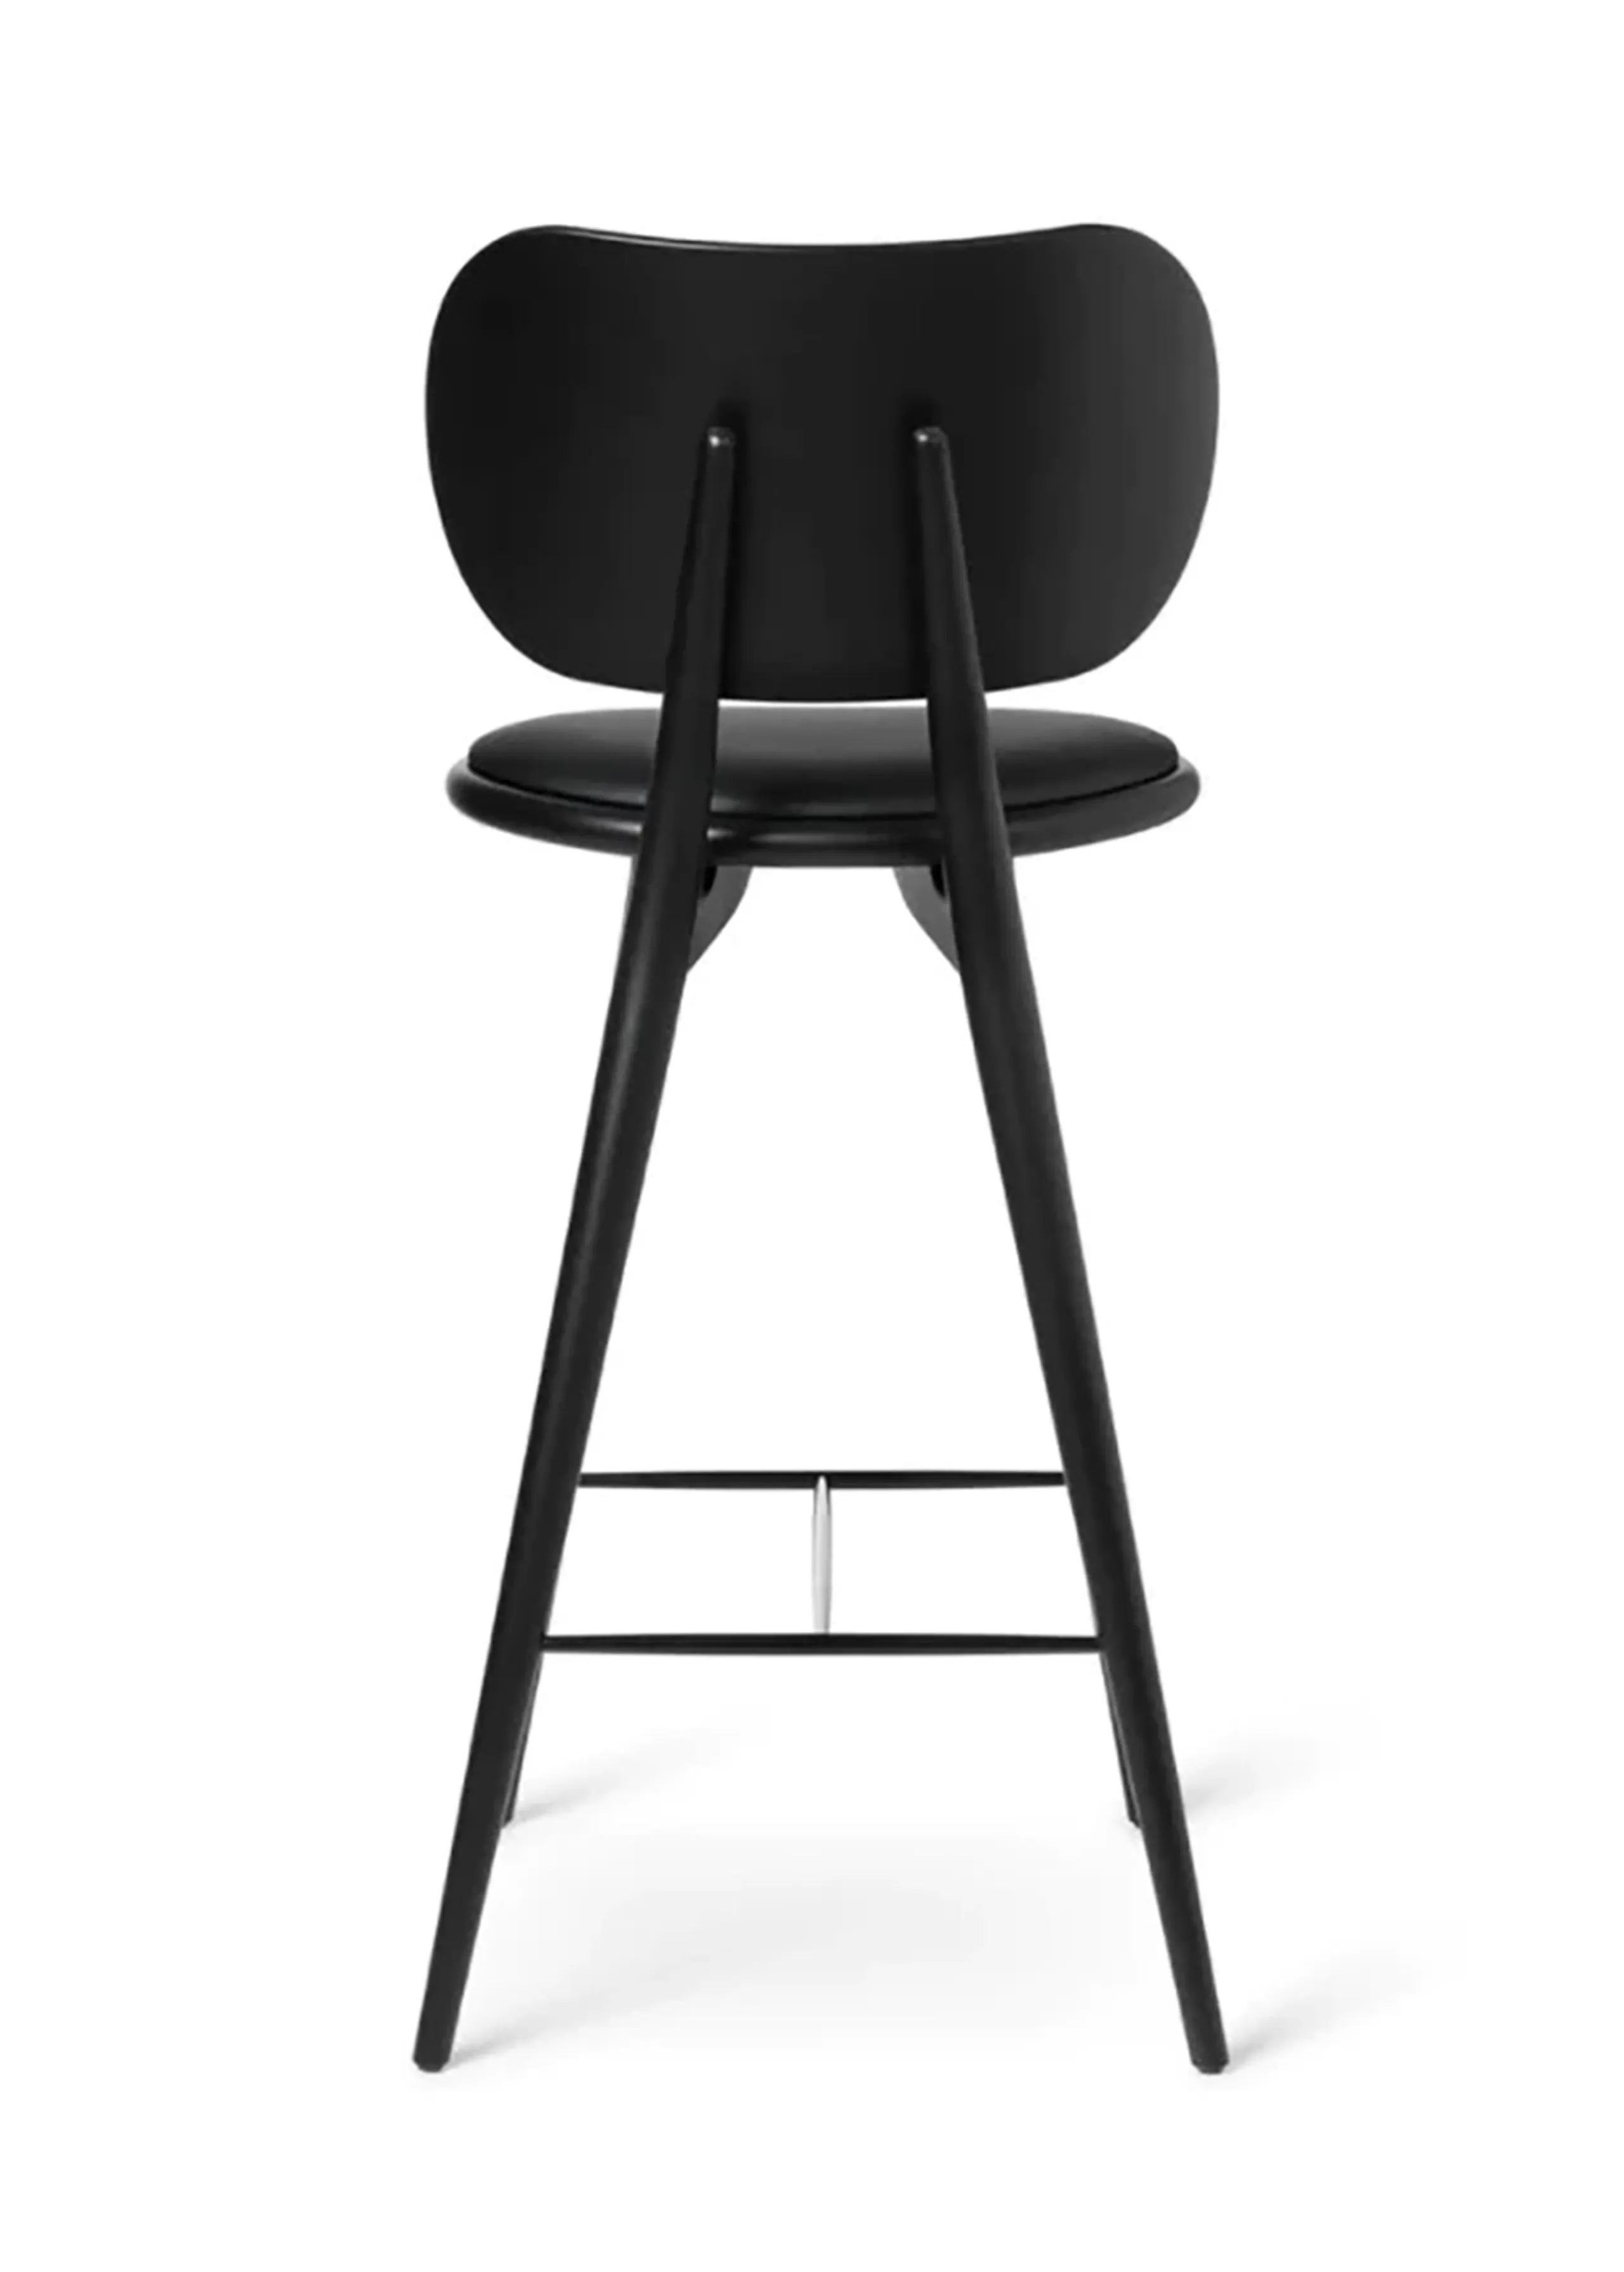 Mater - Chair - High Stool 69 - Black Stained Beech with Backrest